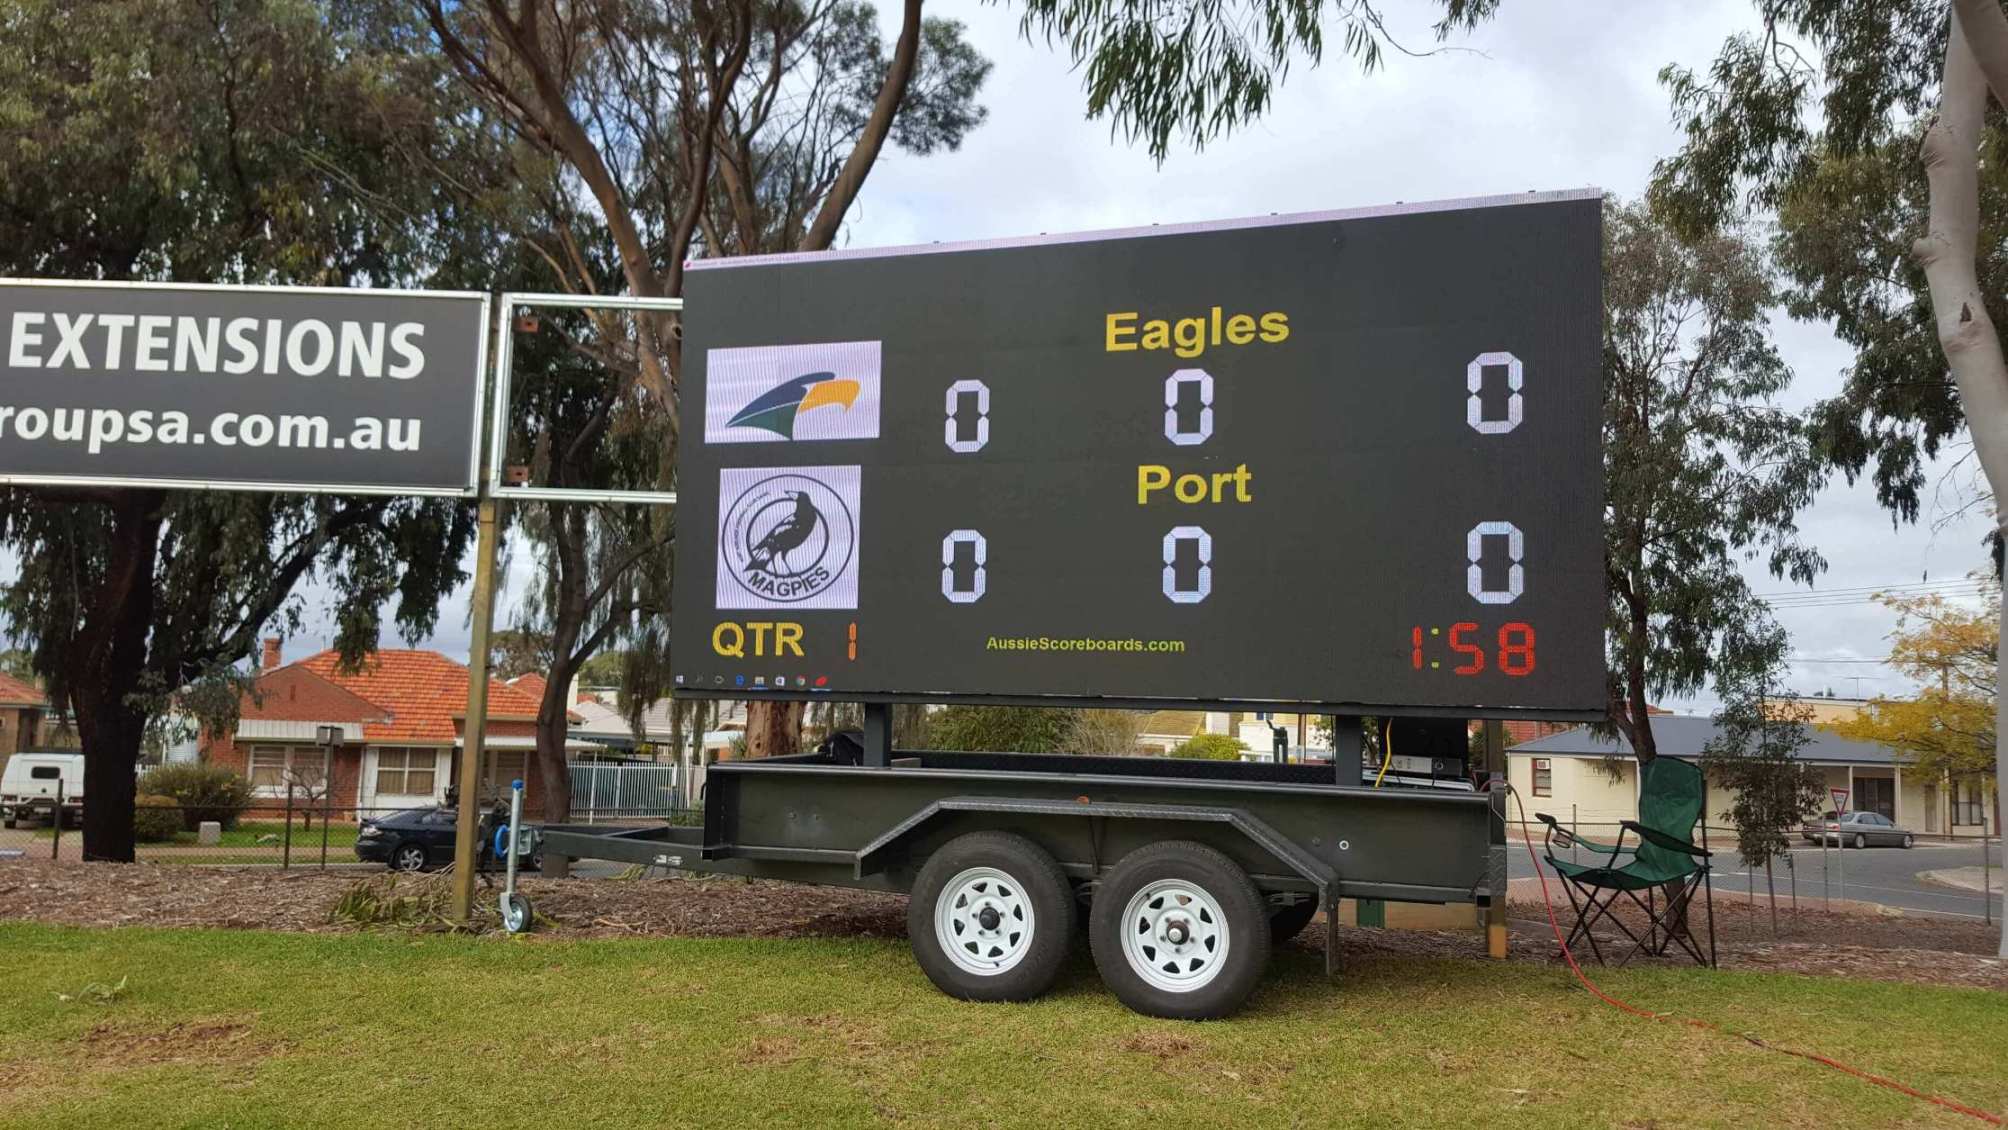 Big Vision Screens supplied the 16.5 sqm LED screen which was used as a coreboard for West Torrens Eagles match of South Australian National Football League